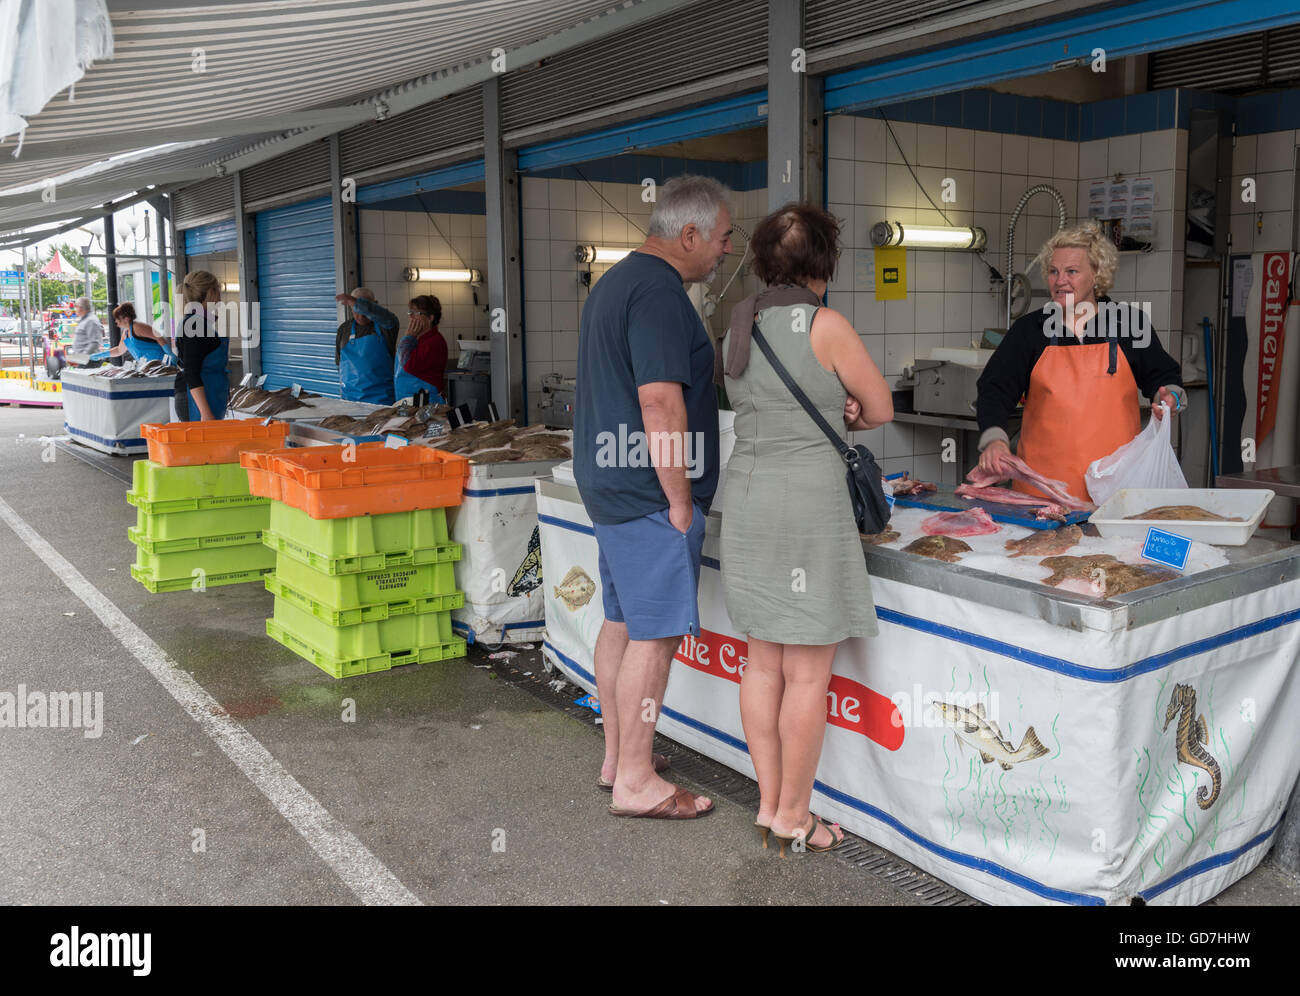 A variety of freshly caught fish for sale at the Etals de Poissons / fish market. Boulogne-Sur-Mer, France. Stock Photo